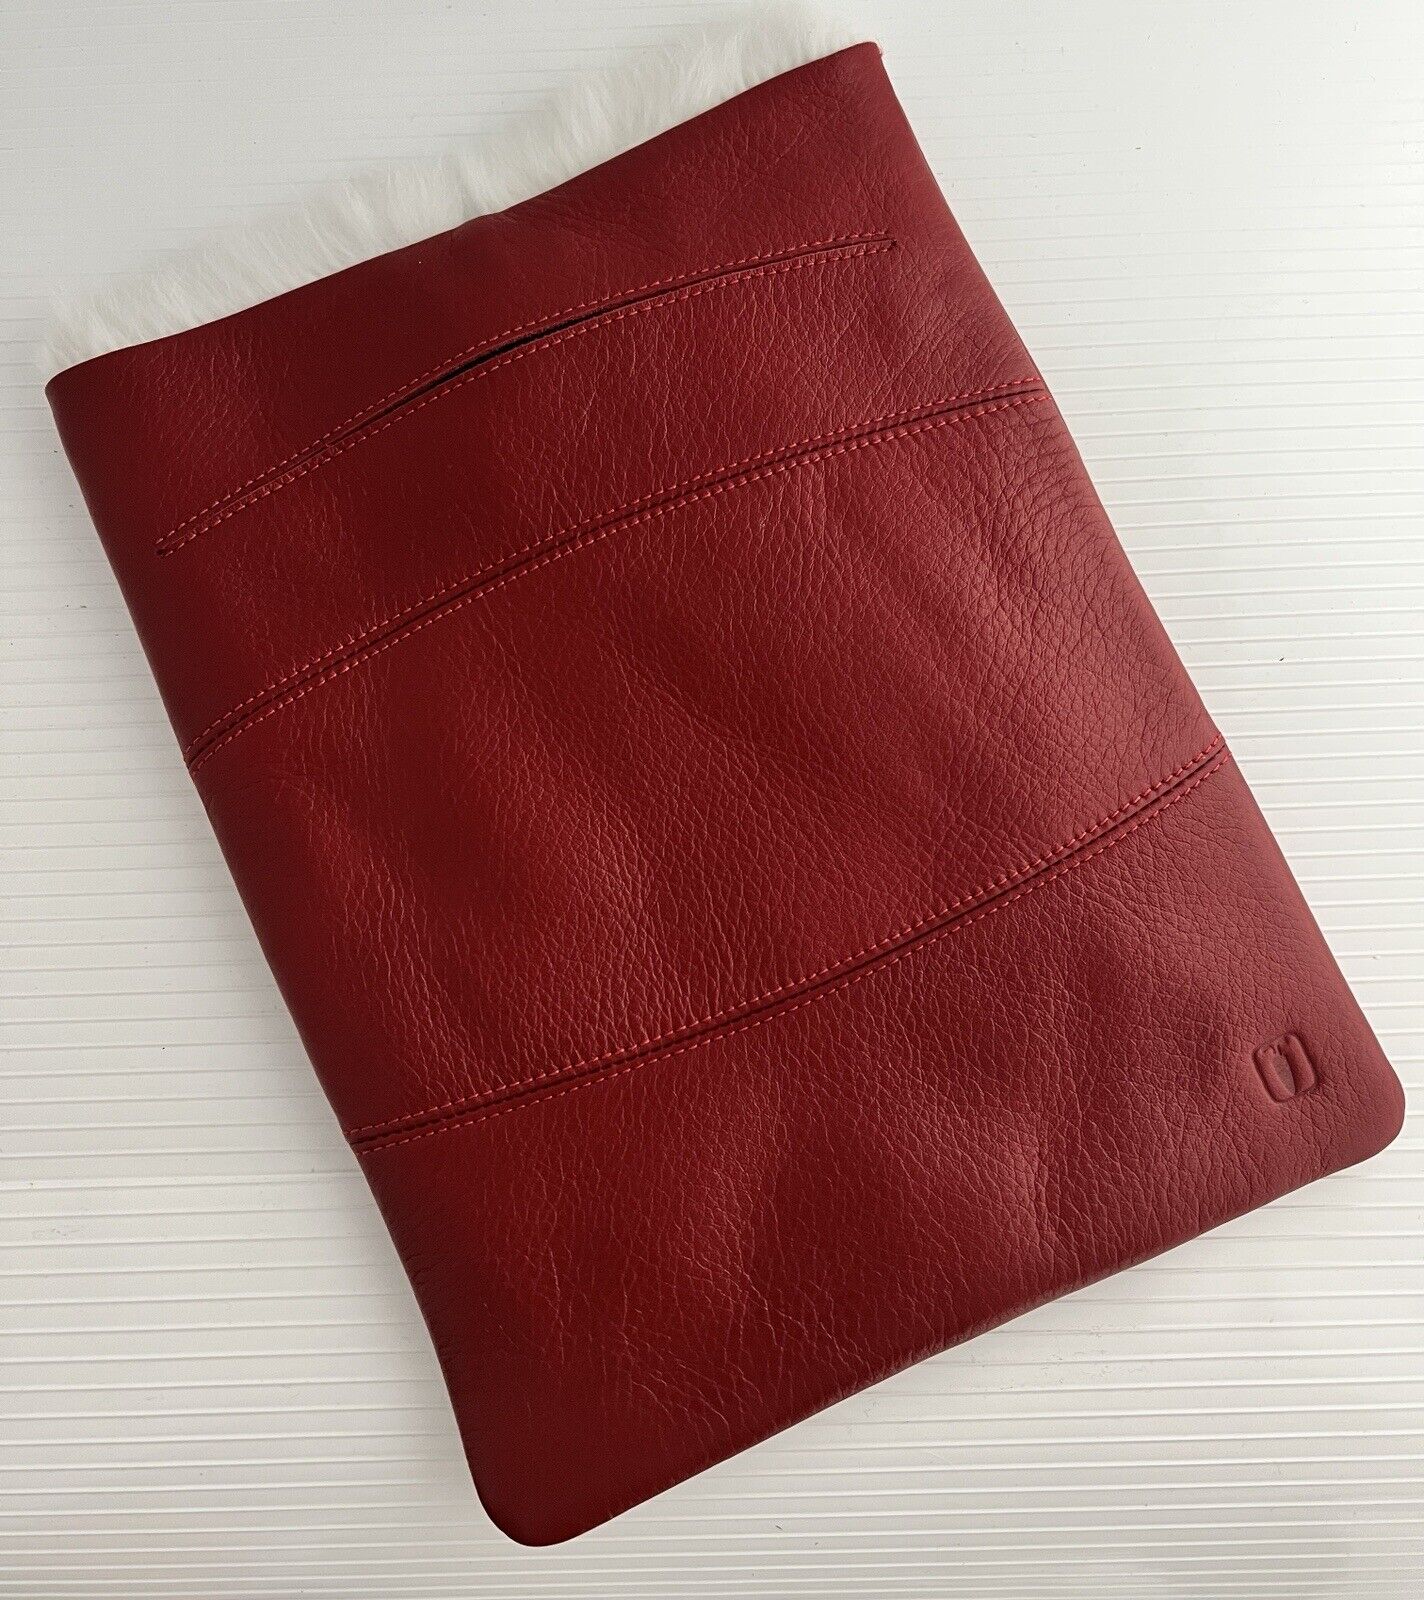 NEW VITERBO Genuine Red Leather and Rabbit Fur Case Cover Protective for iPad